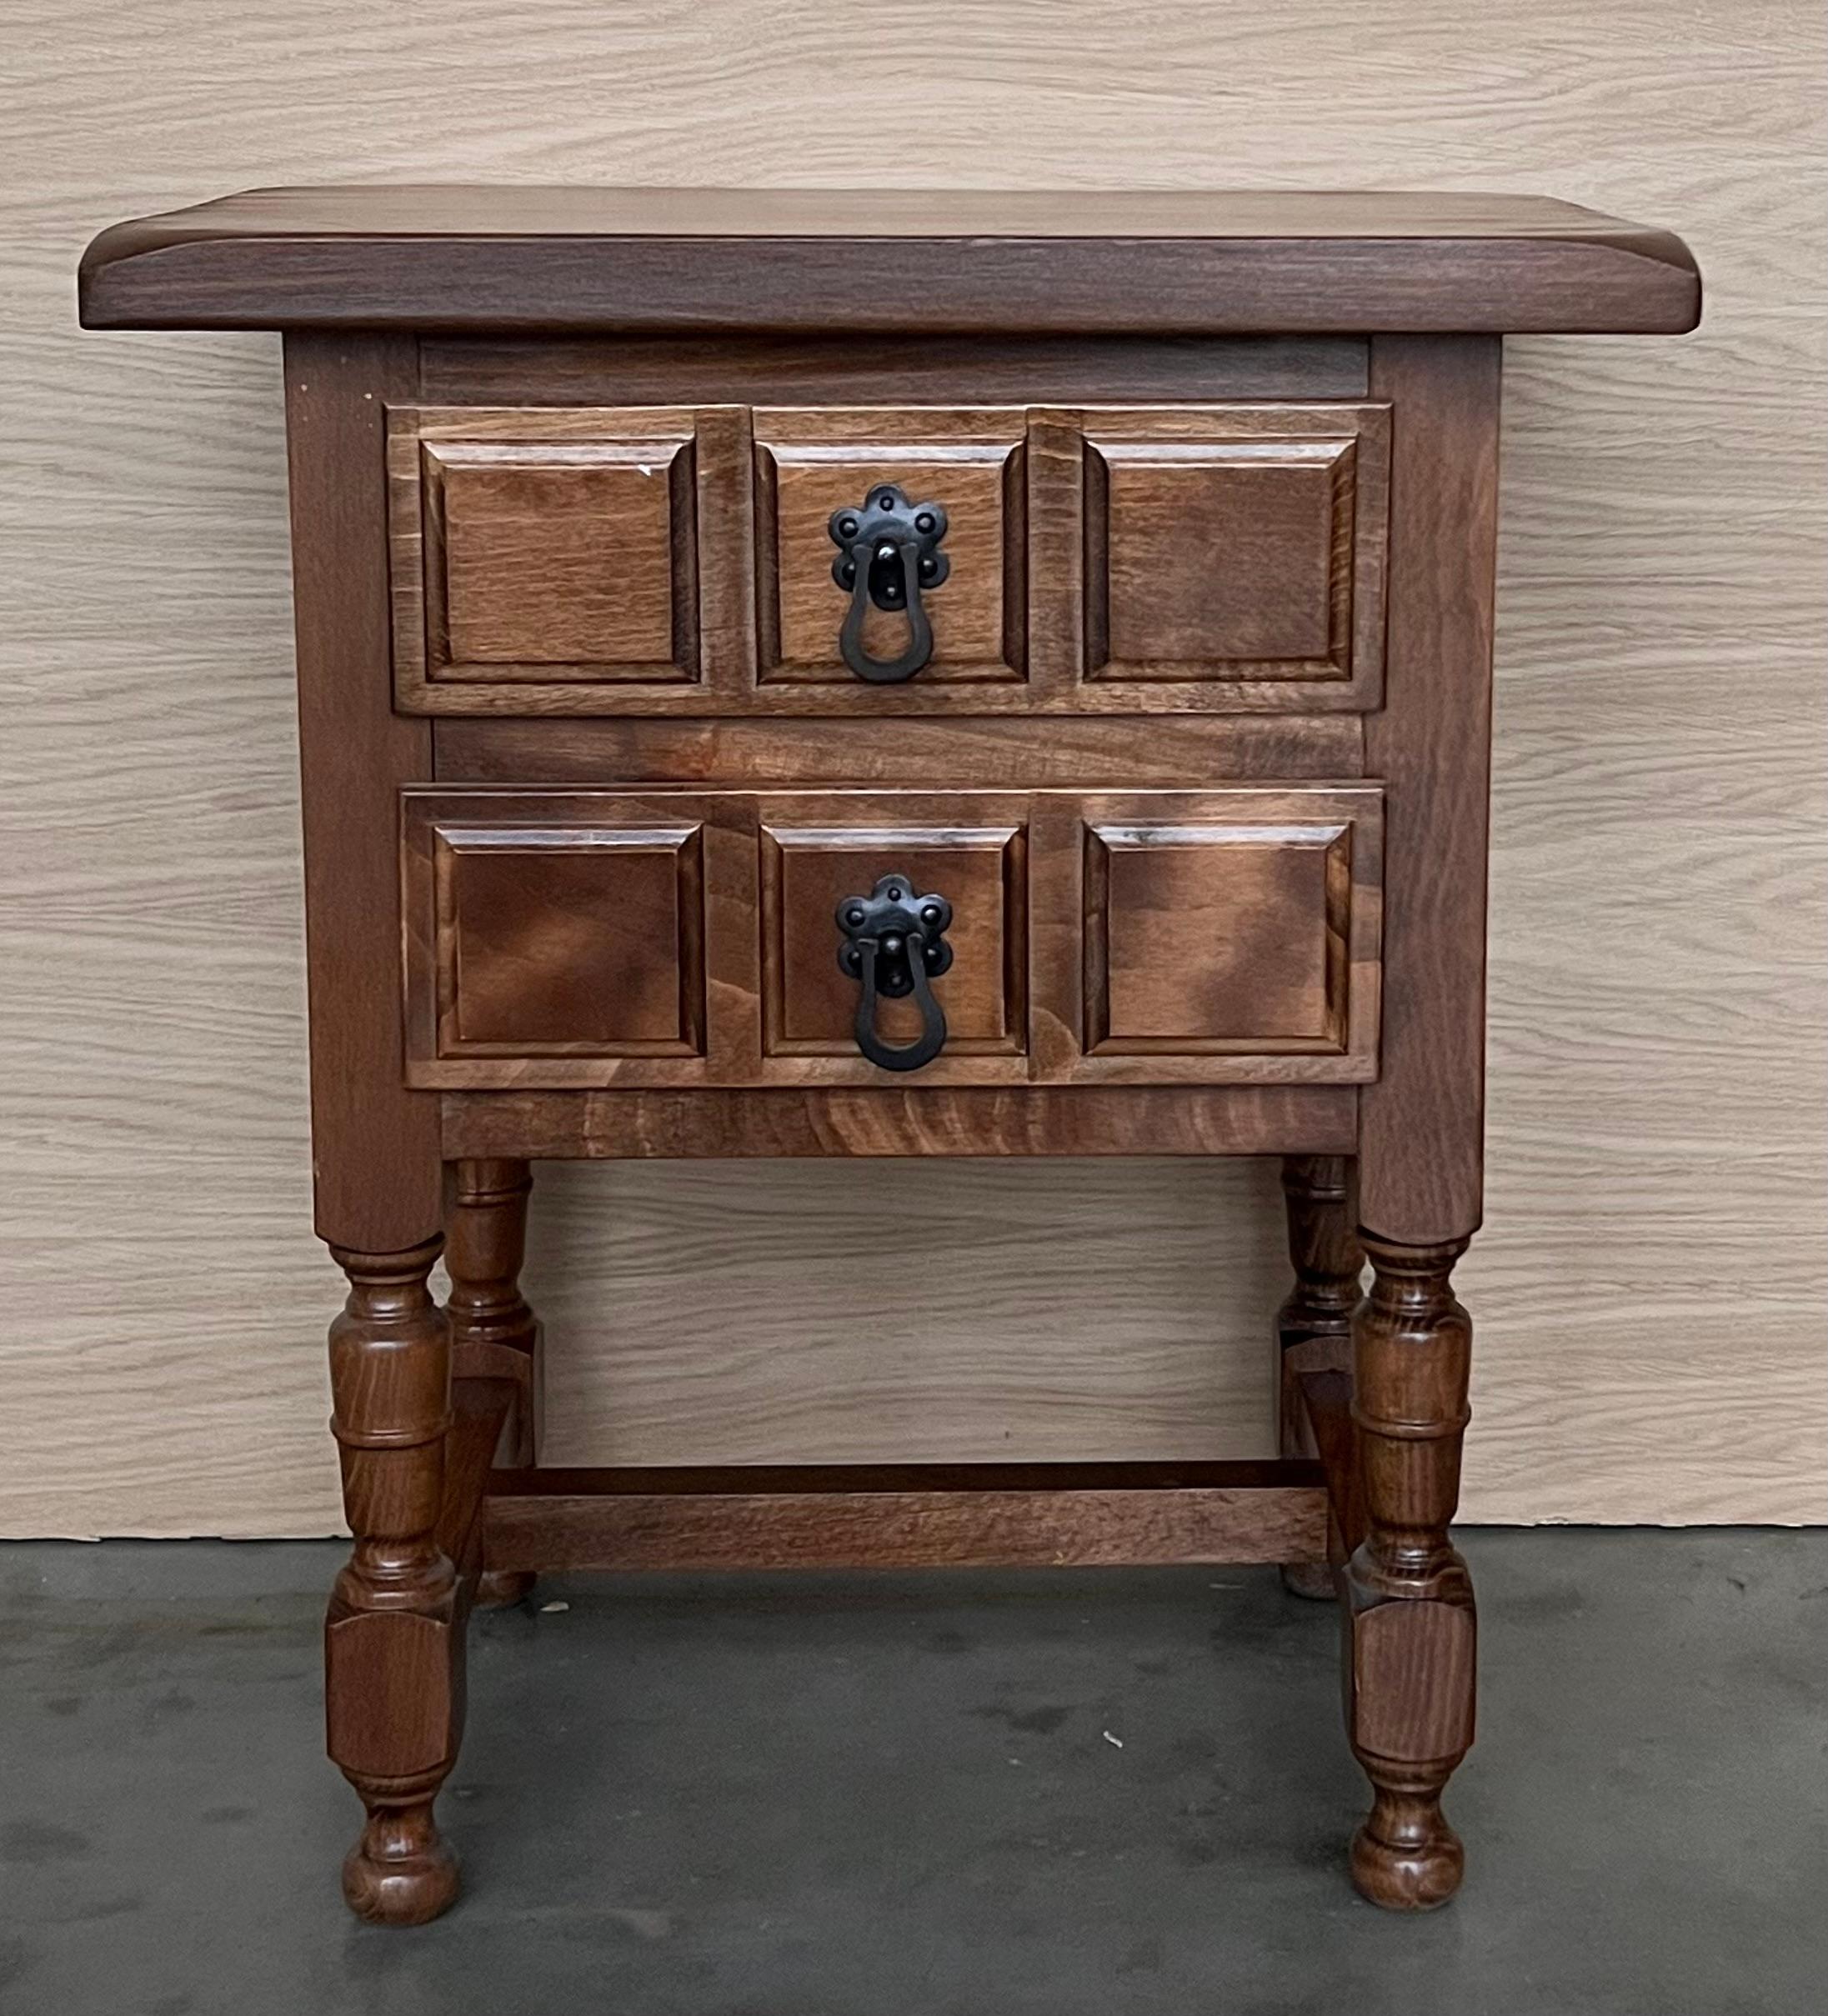 20th century Spanish nightstand with two carved drawer and flour iron hardware .
Beautiful table that you can use like a nightstand or side table, end table... or table lamp.